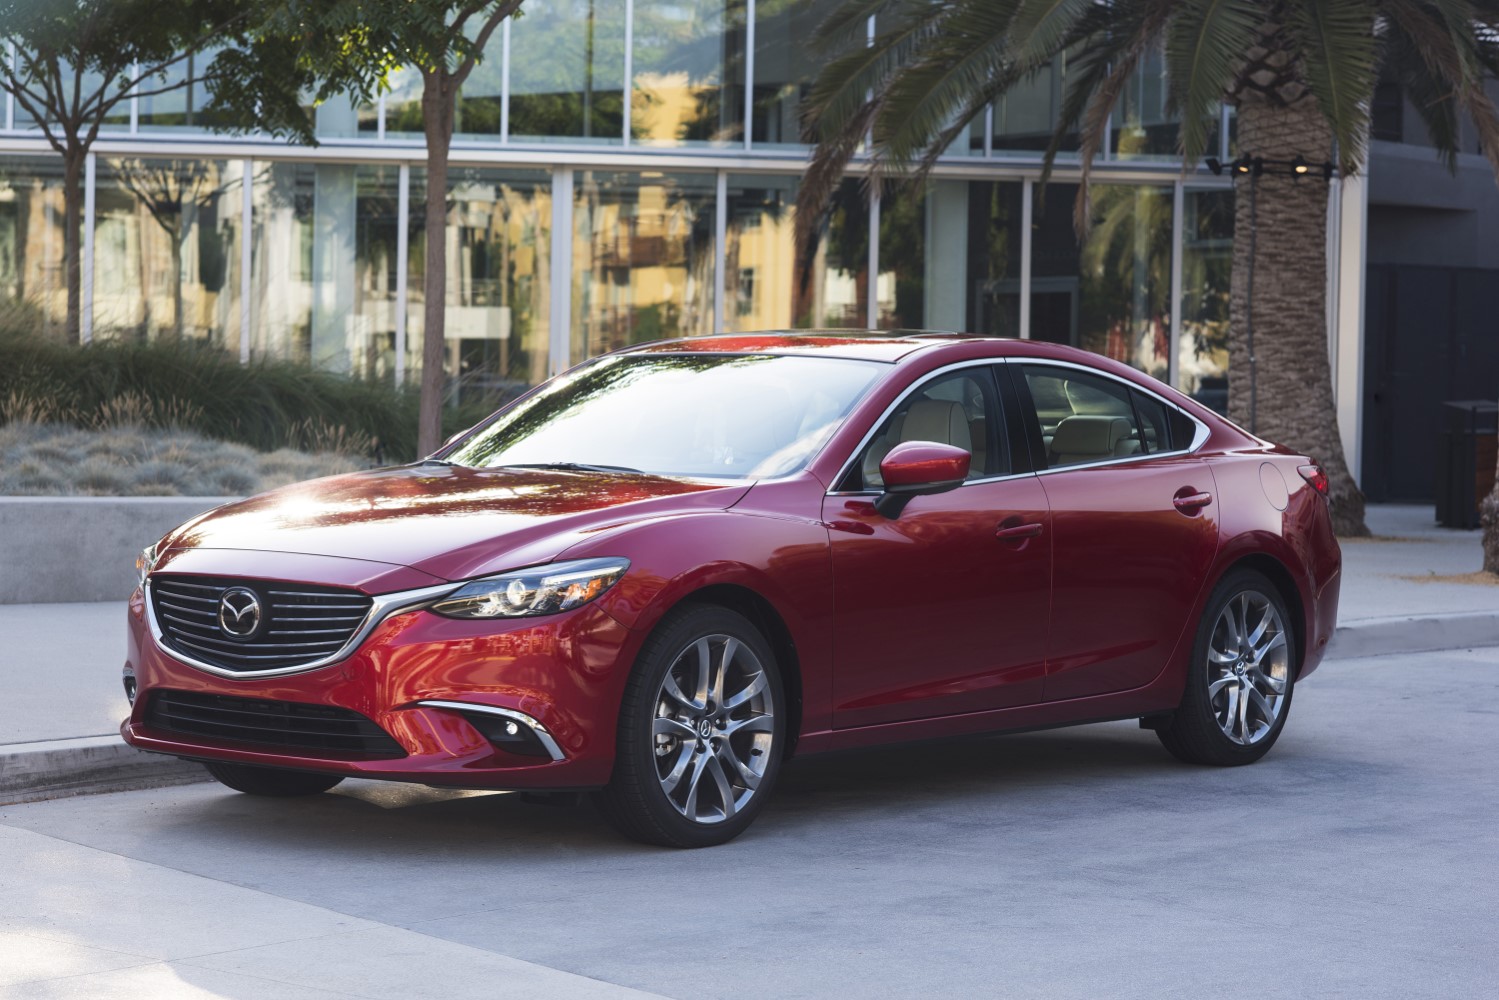 2017 Mazda 6 Sedan Specs, Review, and Pricing | CarSession